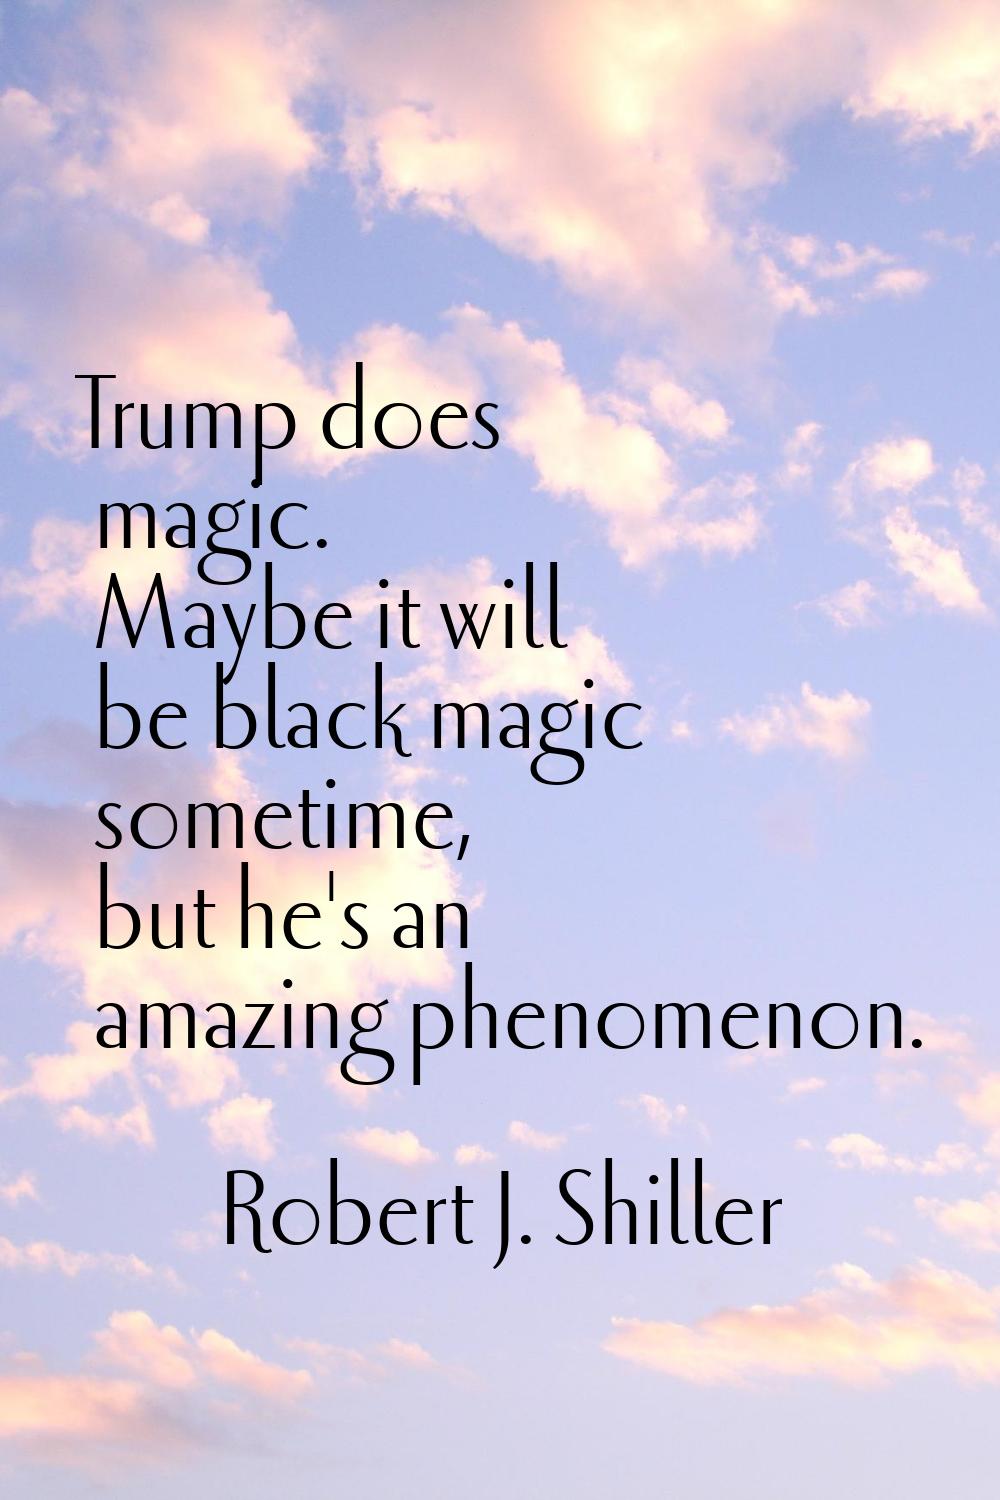 Trump does magic. Maybe it will be black magic sometime, but he's an amazing phenomenon.